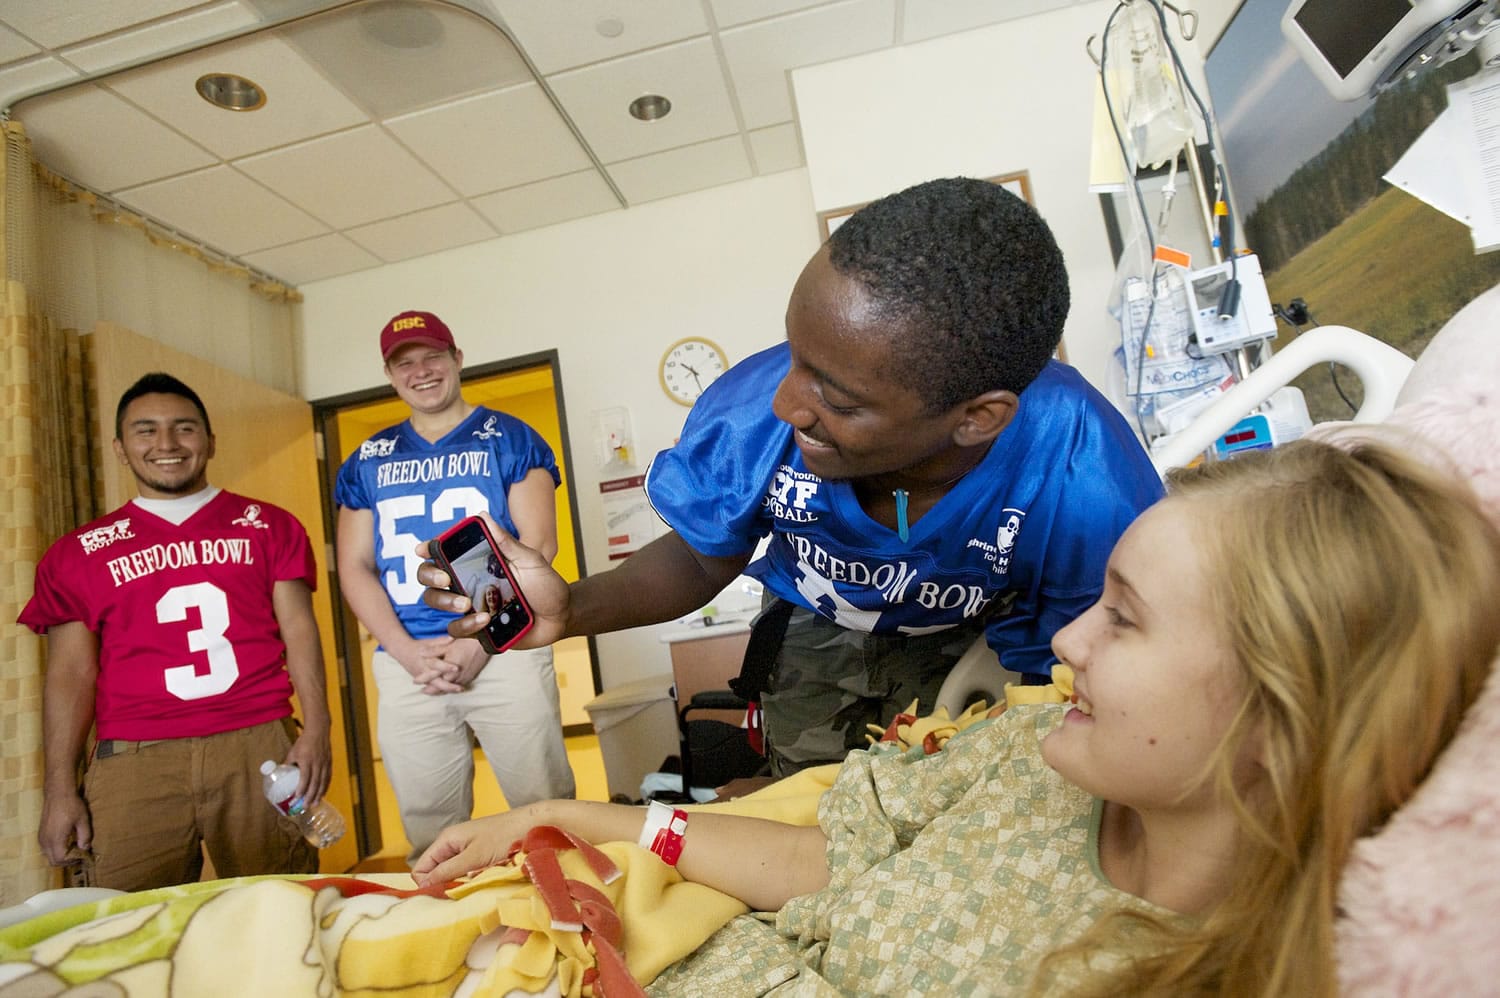 E'Lon Mack, from Heritage, shoots a selfie with Shriners patient Skyla deLint, 17, from Cove, OR, during a tour of the hospital, Wednesday, July 9, 2014.